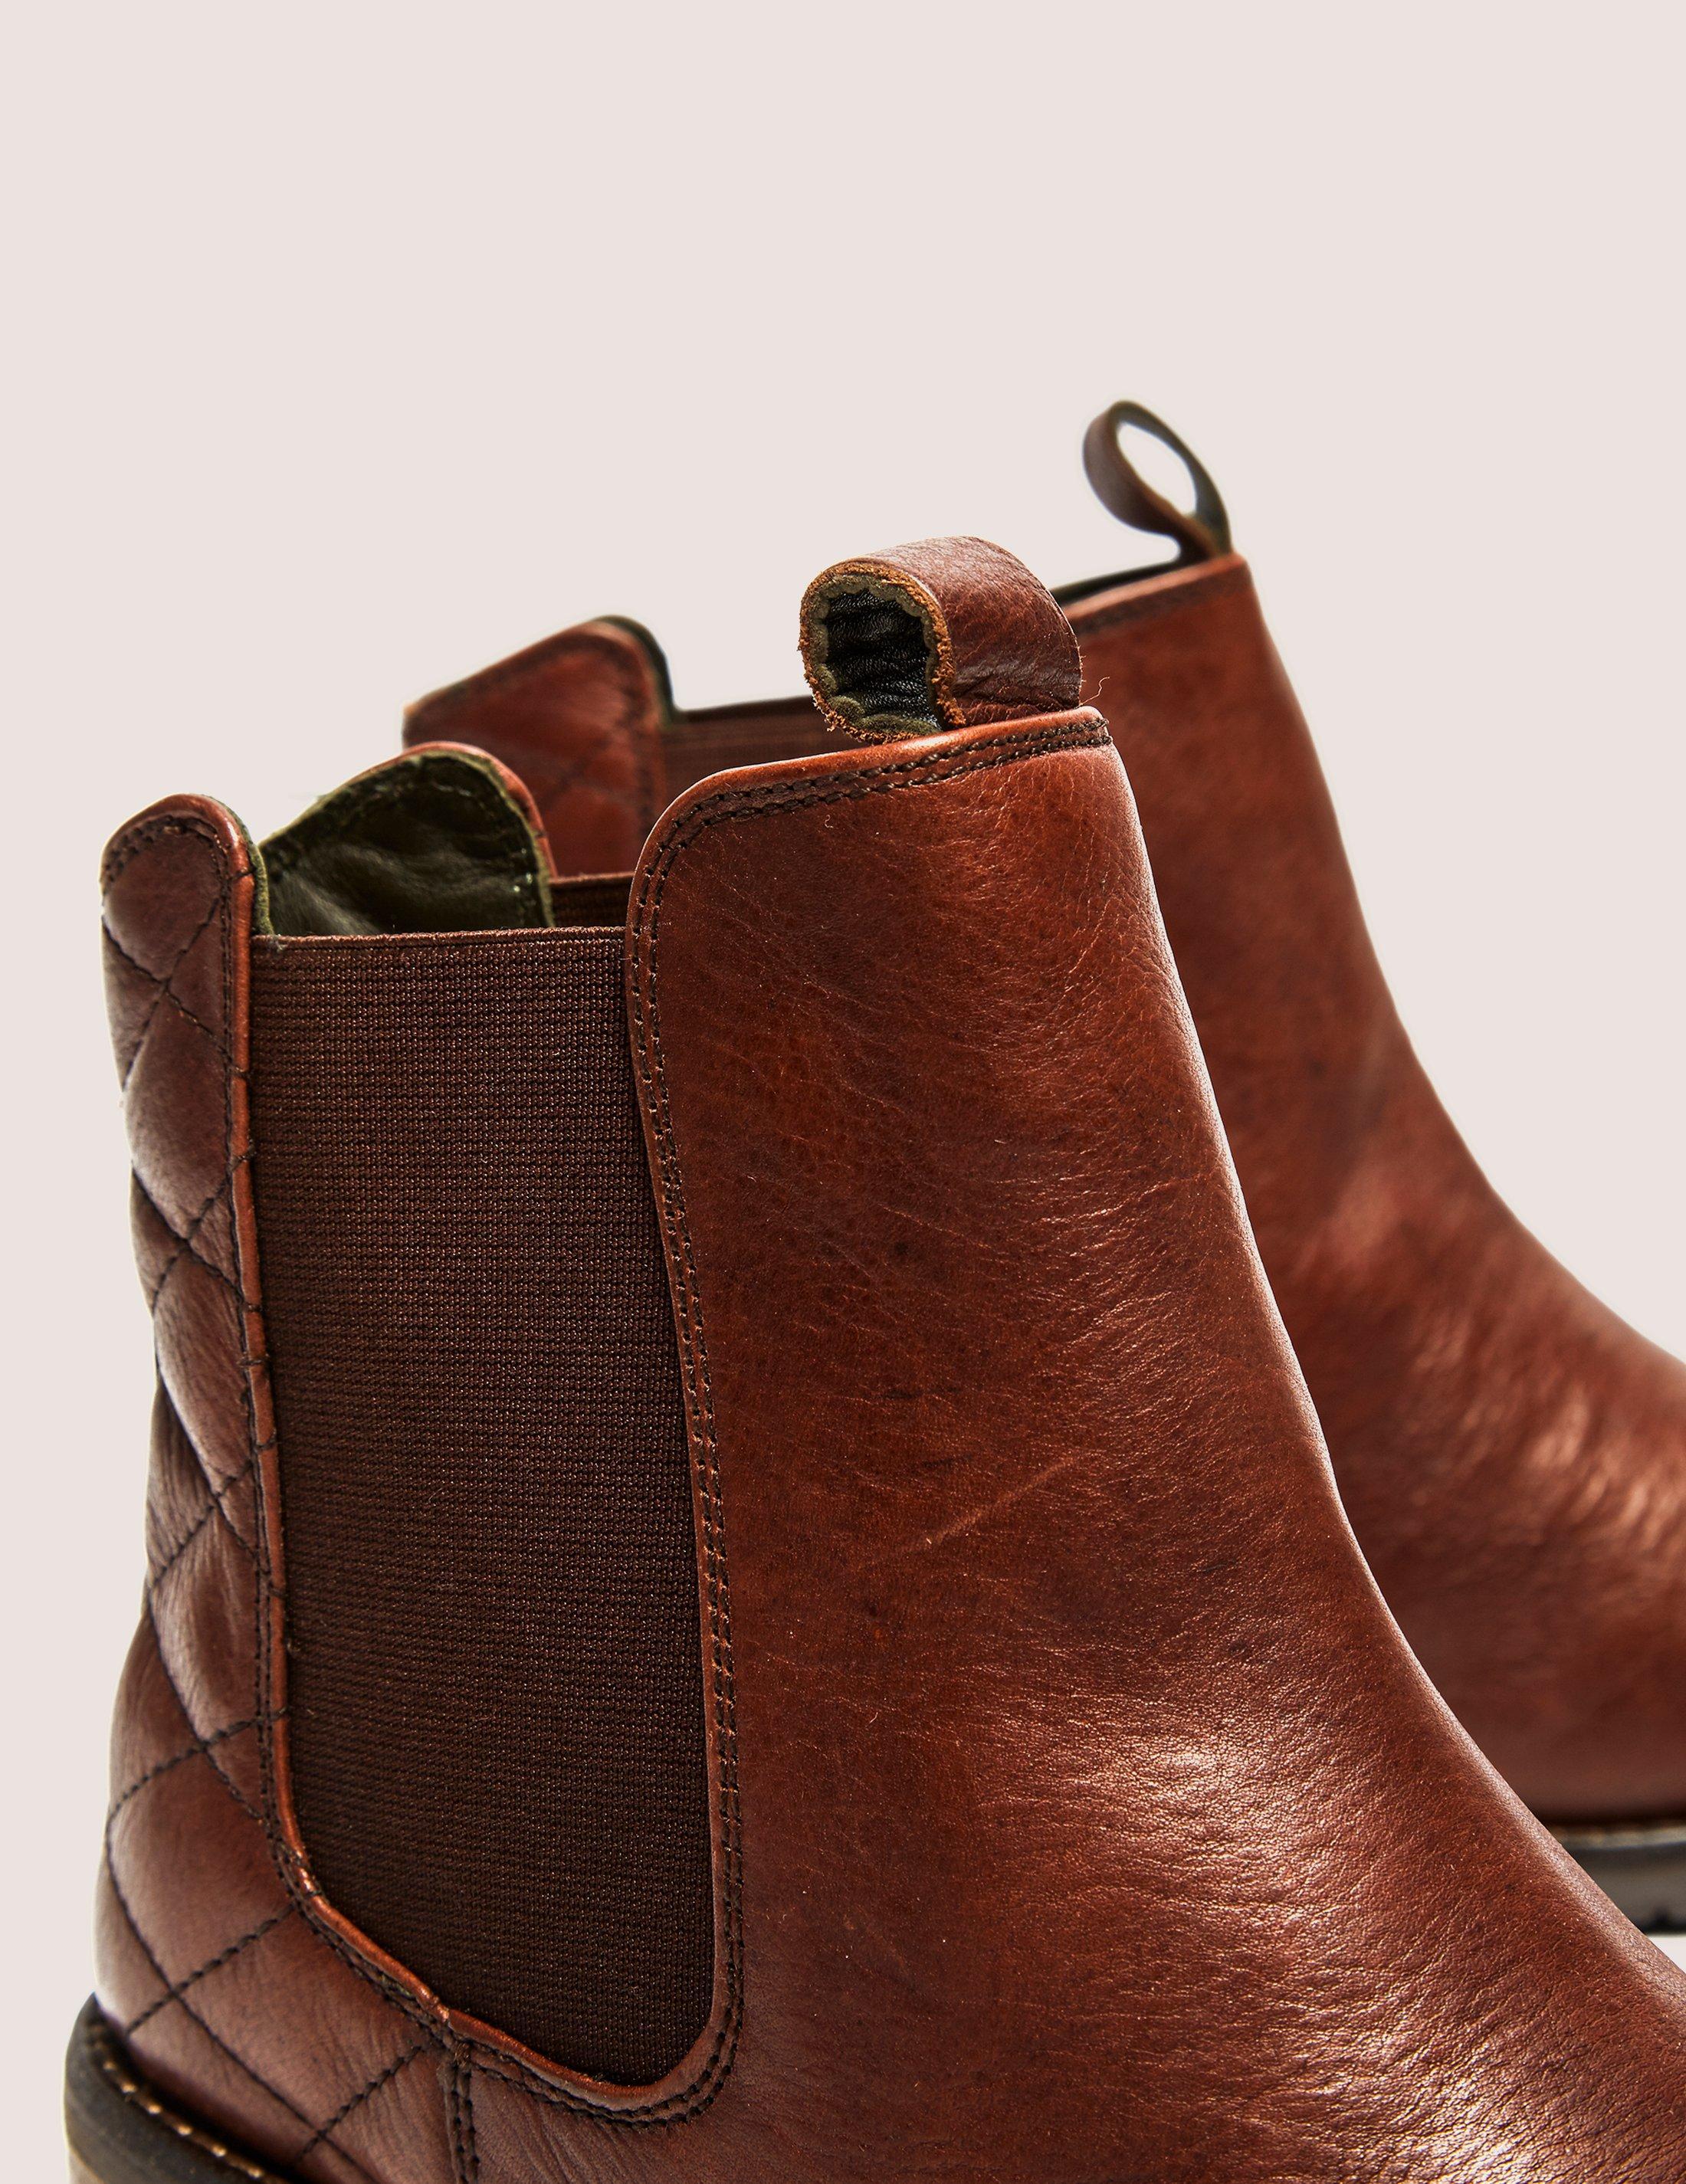 barbour latimer boots